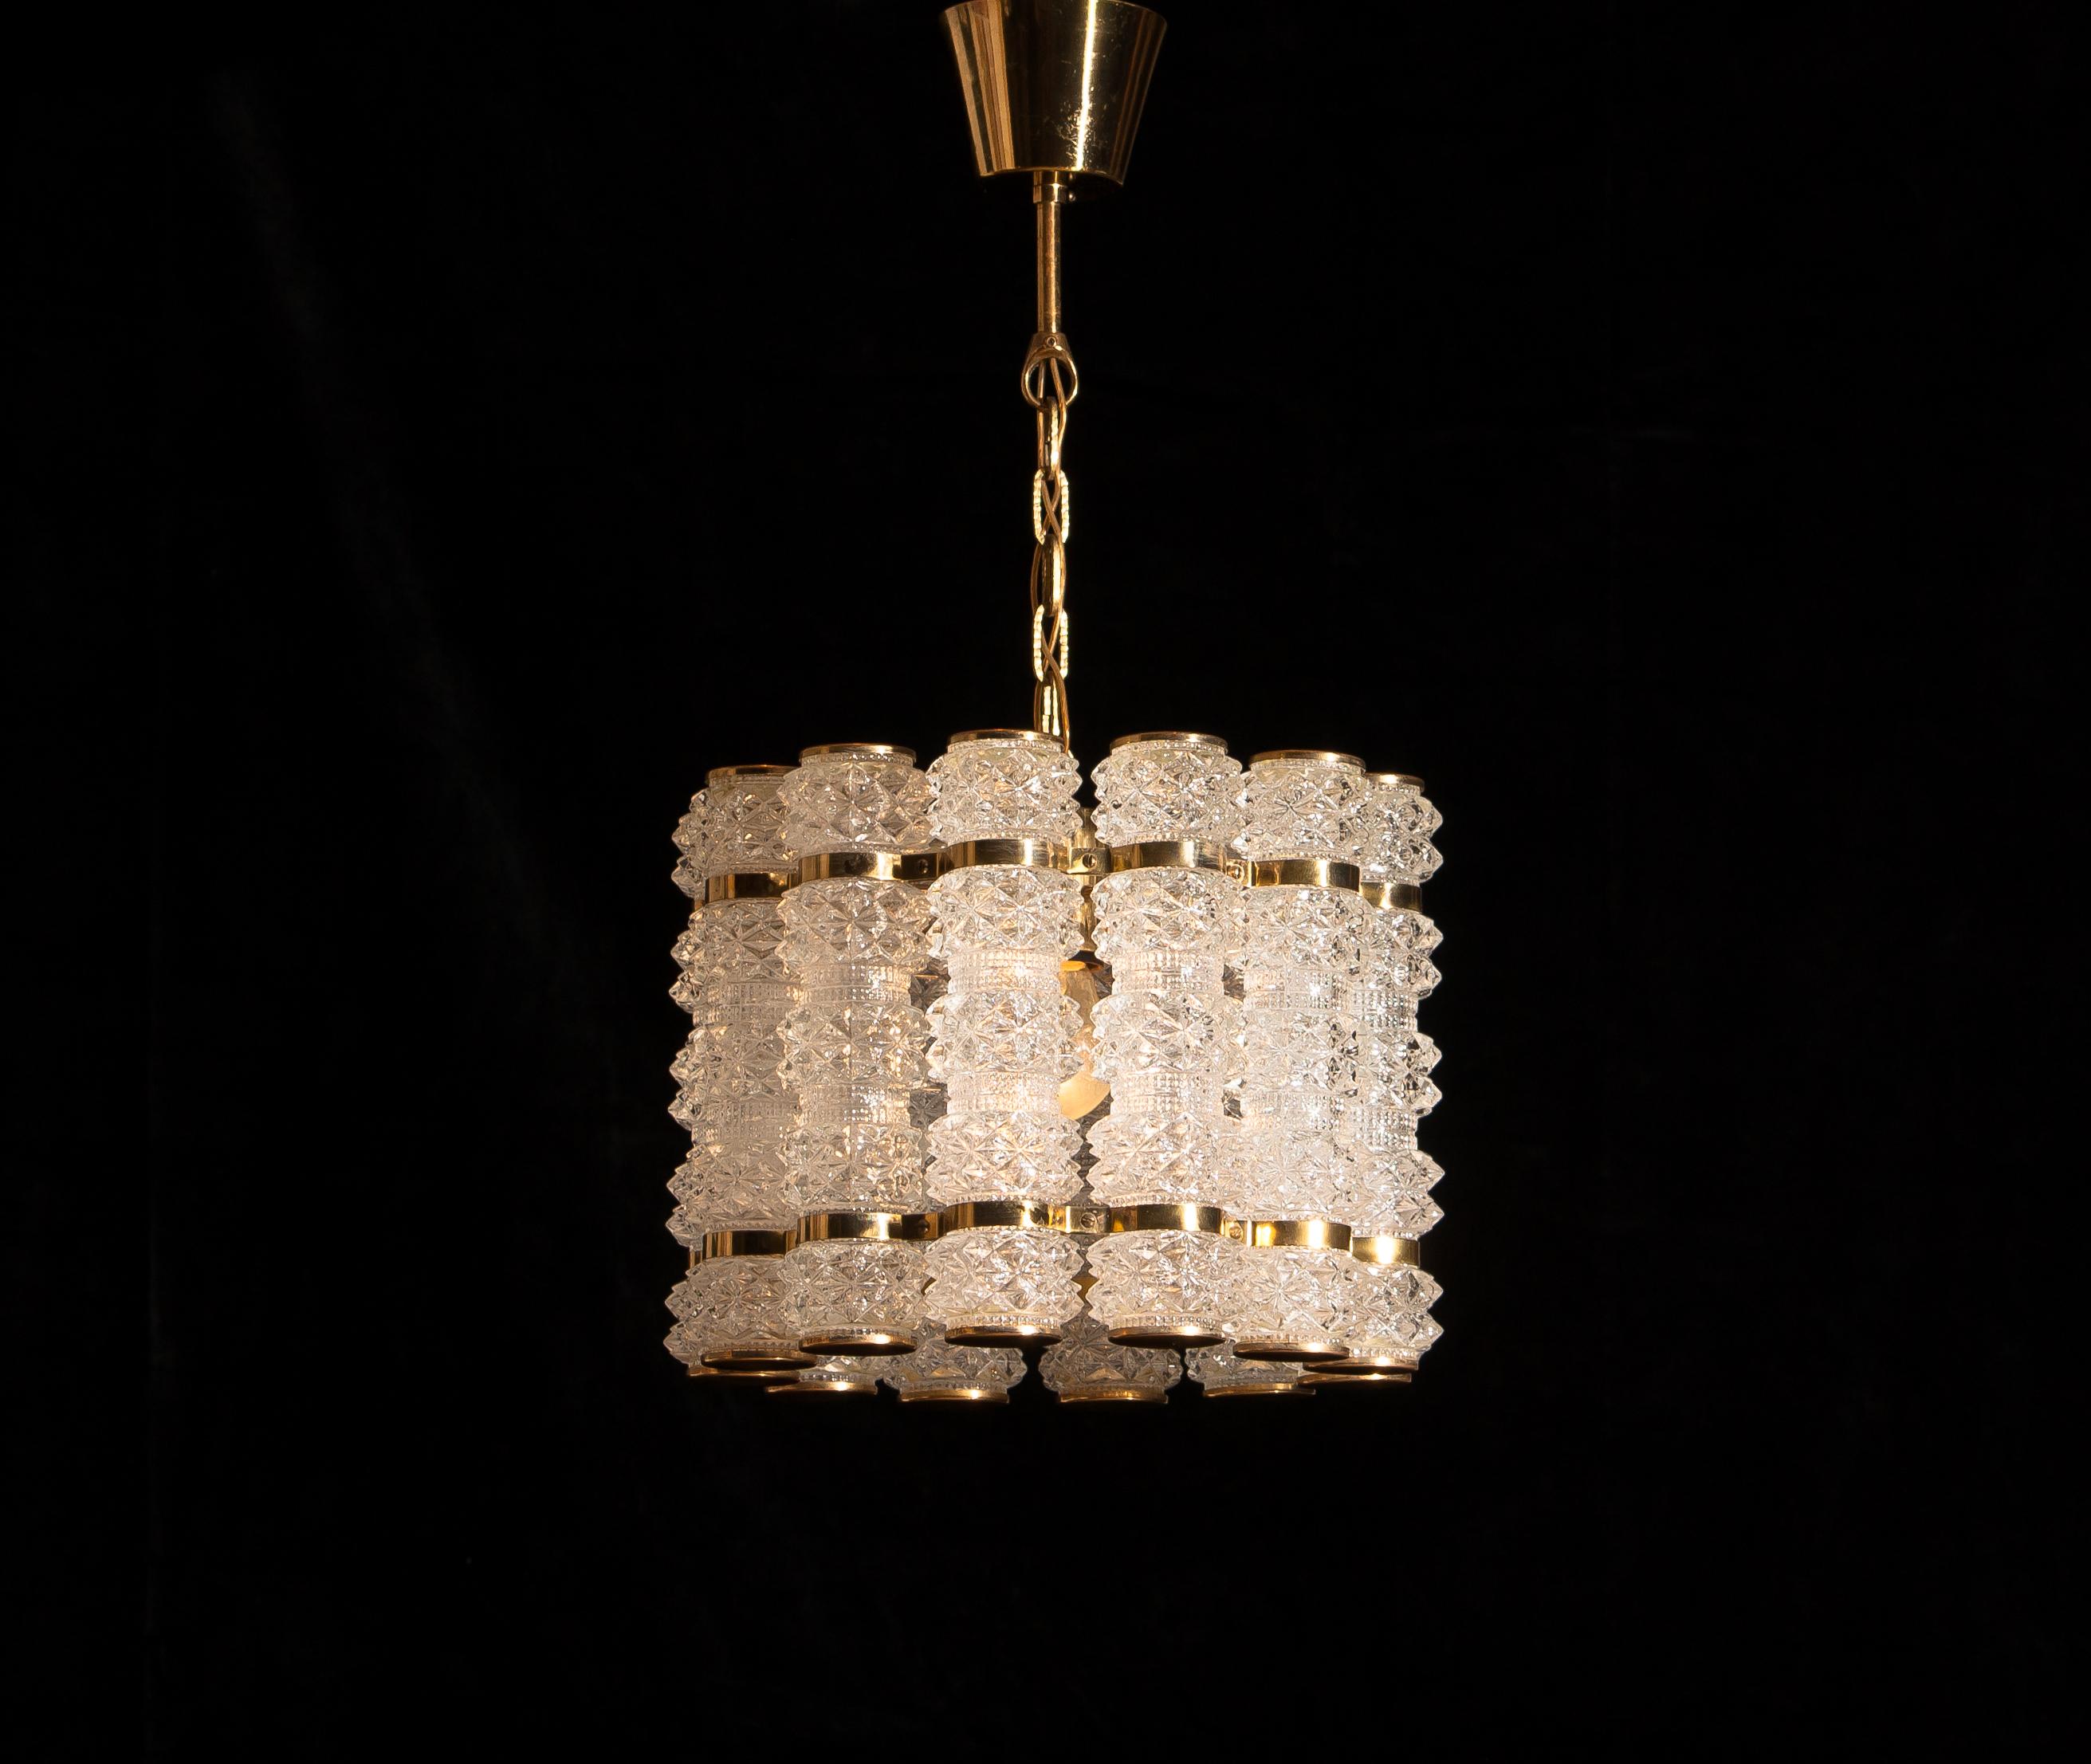 Beautiful and in perfect condition brass chandelier or pendant with twelve crystal cylinders.
Designed and manufactured in by Tyringe Konsthantverk, Sweden.
All crystal cylinders are made by Orrefors, Sweden.
Wired for 220 and 110 volts. Bulb